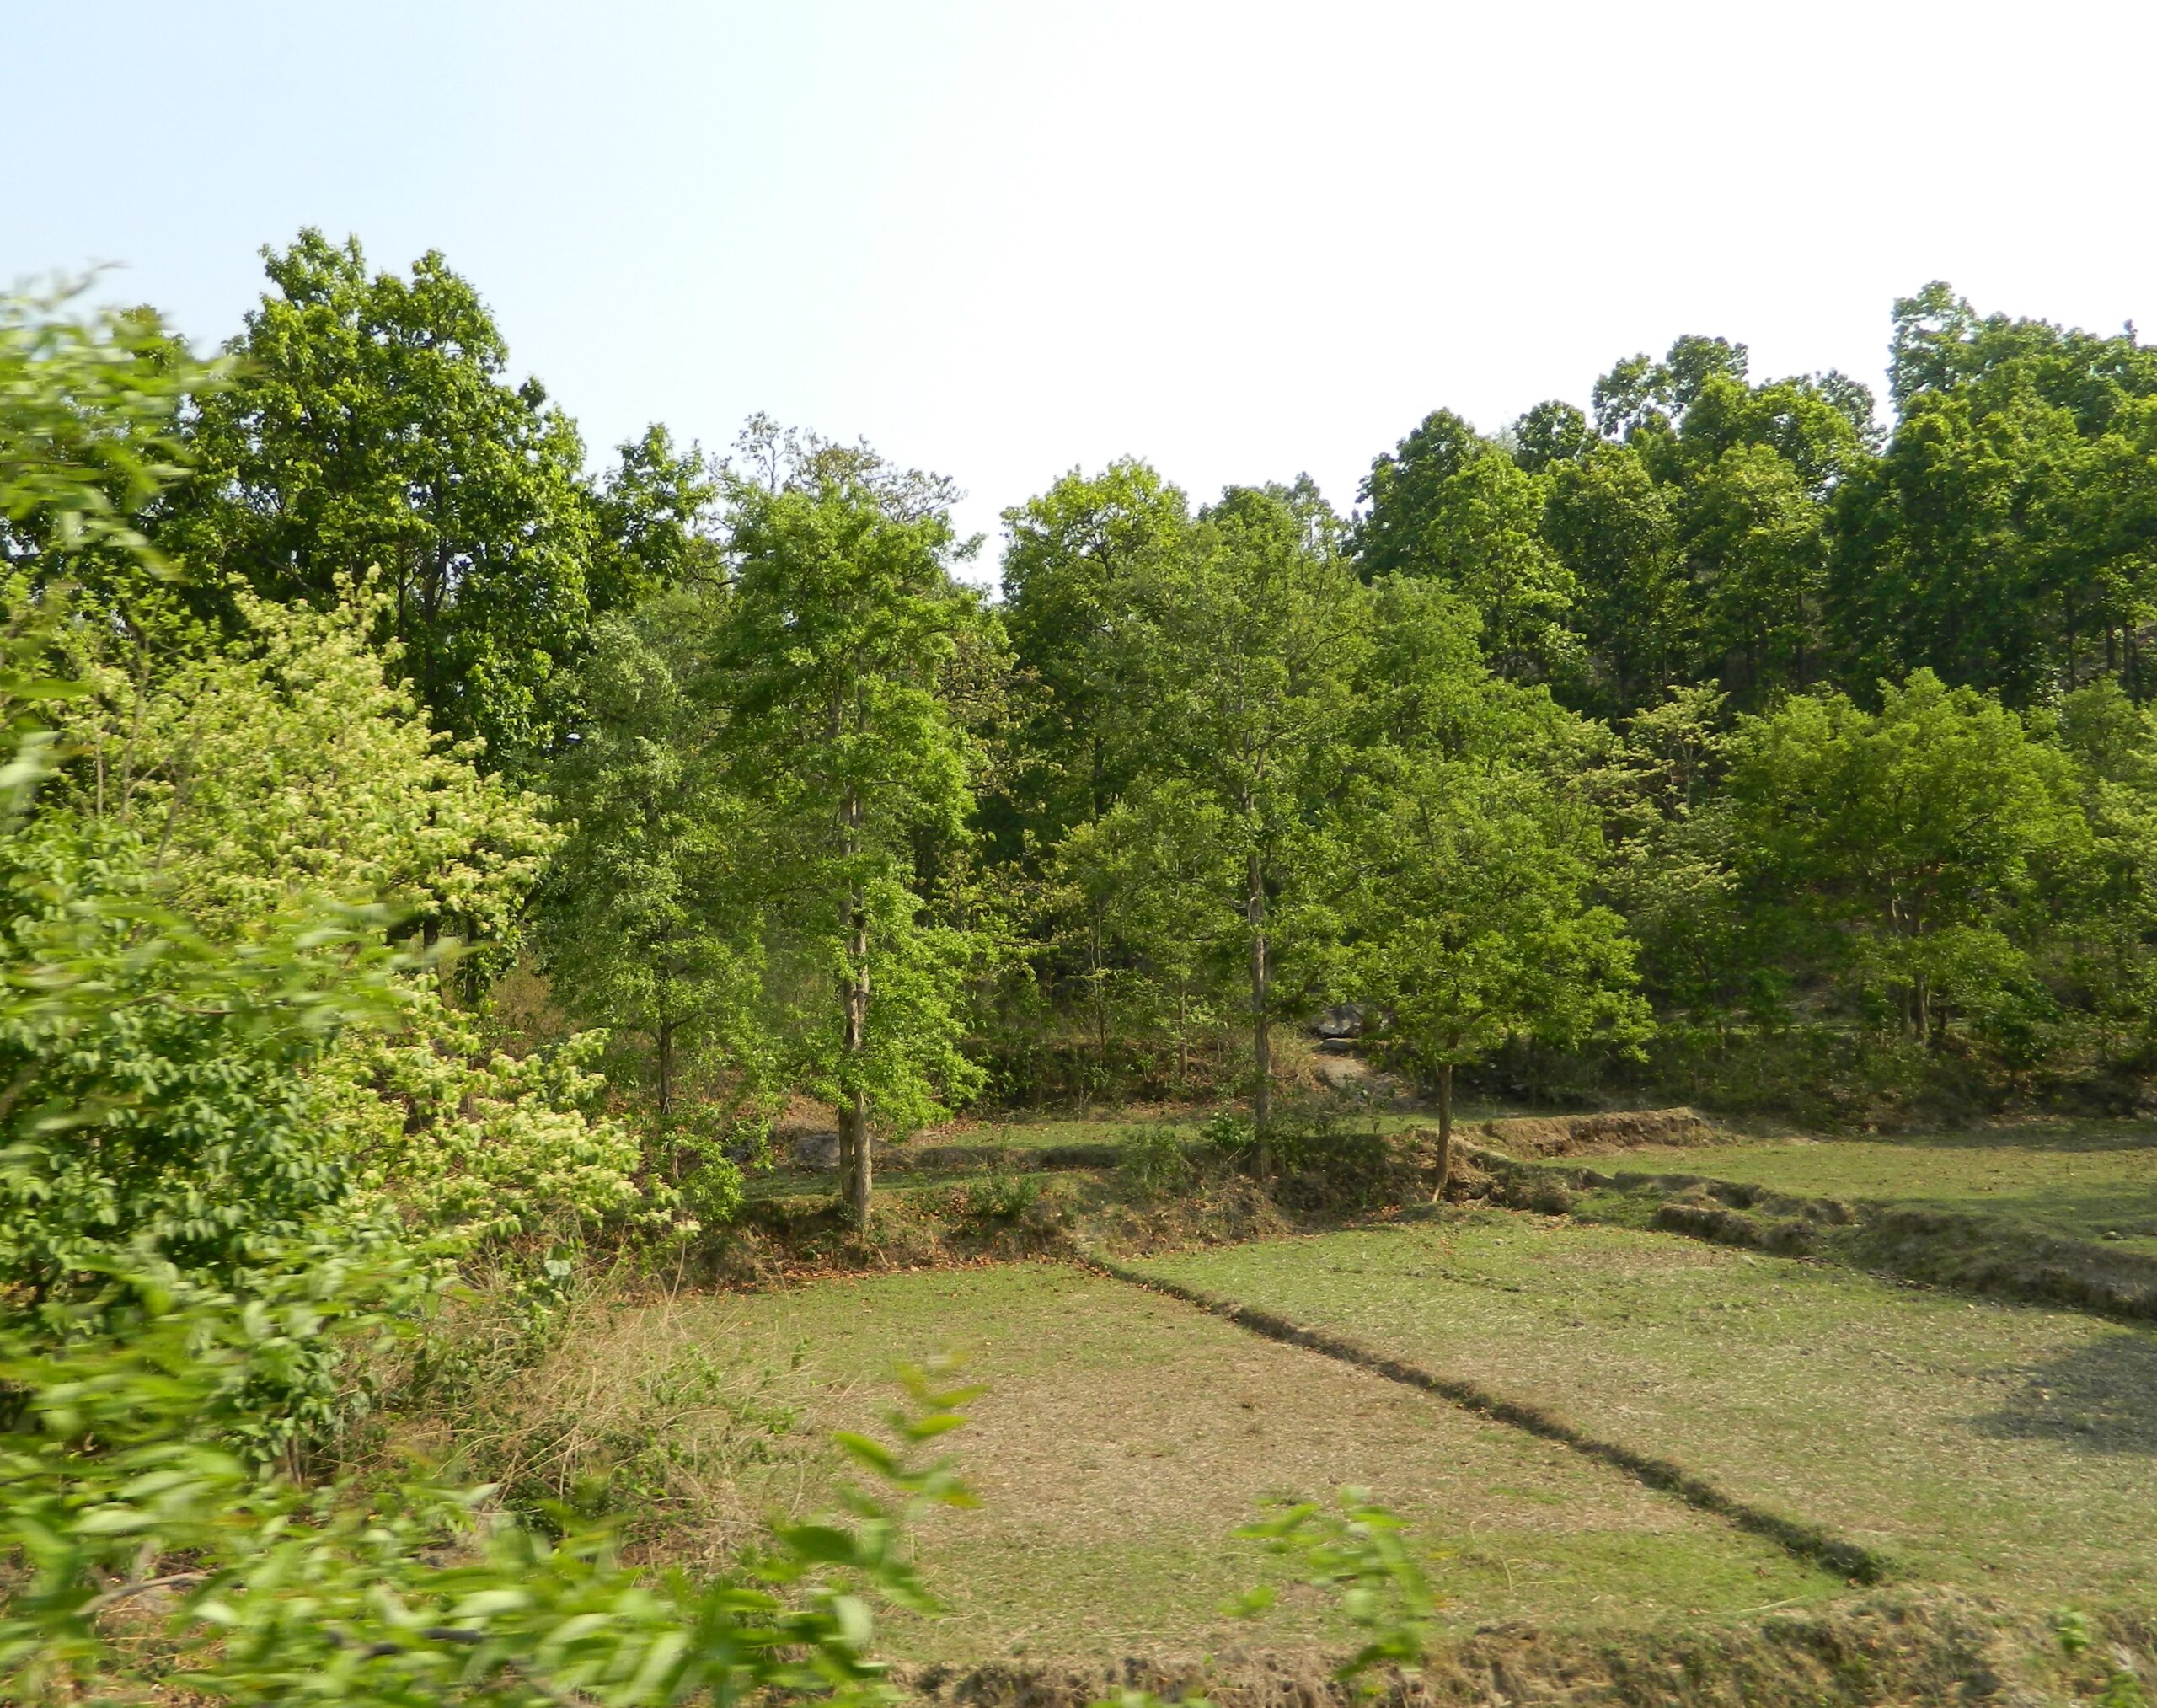 Forest Land